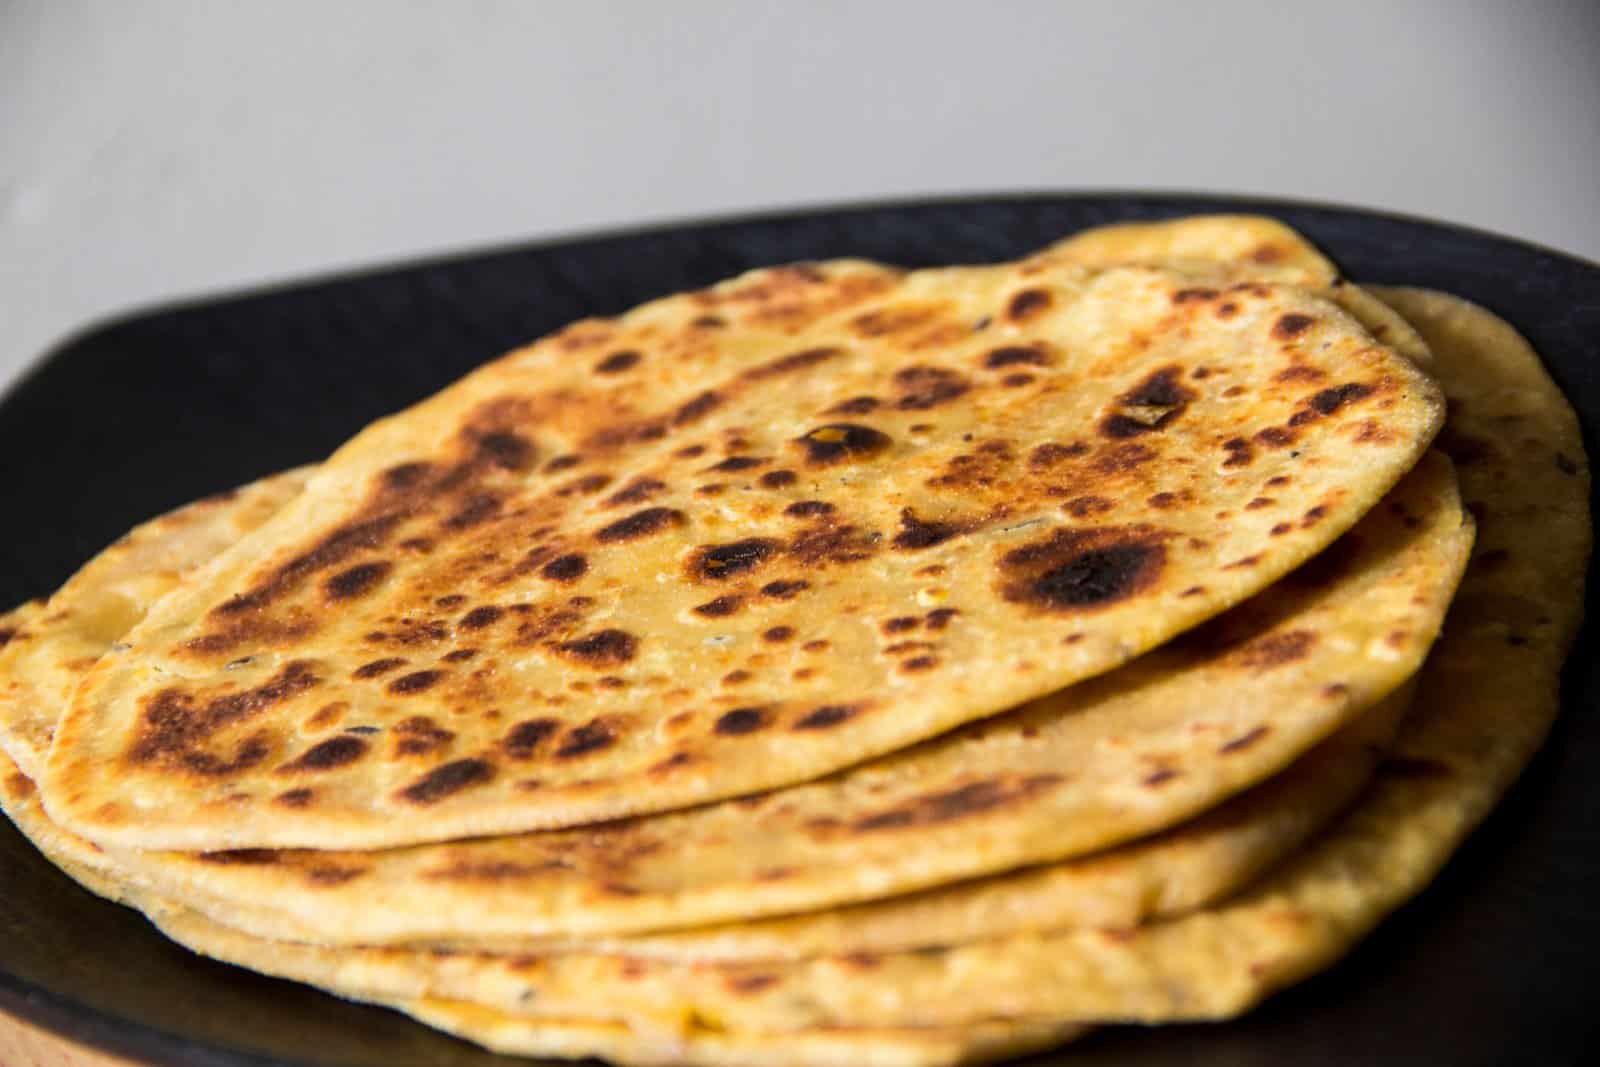 Image Credit: Shutterstock / prachi_sharma <p><span>As the sun sets over the rolling hills of Marche, indulge in crescia sfogliata, a traditional flatbread that’s as light and airy as a summer breeze. Made with layers of paper-thin dough and filled with savory ingredients like cheese, herbs, and cured meats, this delicate bread is a beloved specialty of Urbino. Pair it with a glass of local wine and watch the colors of the sky change as you savor every bite.</span></p>